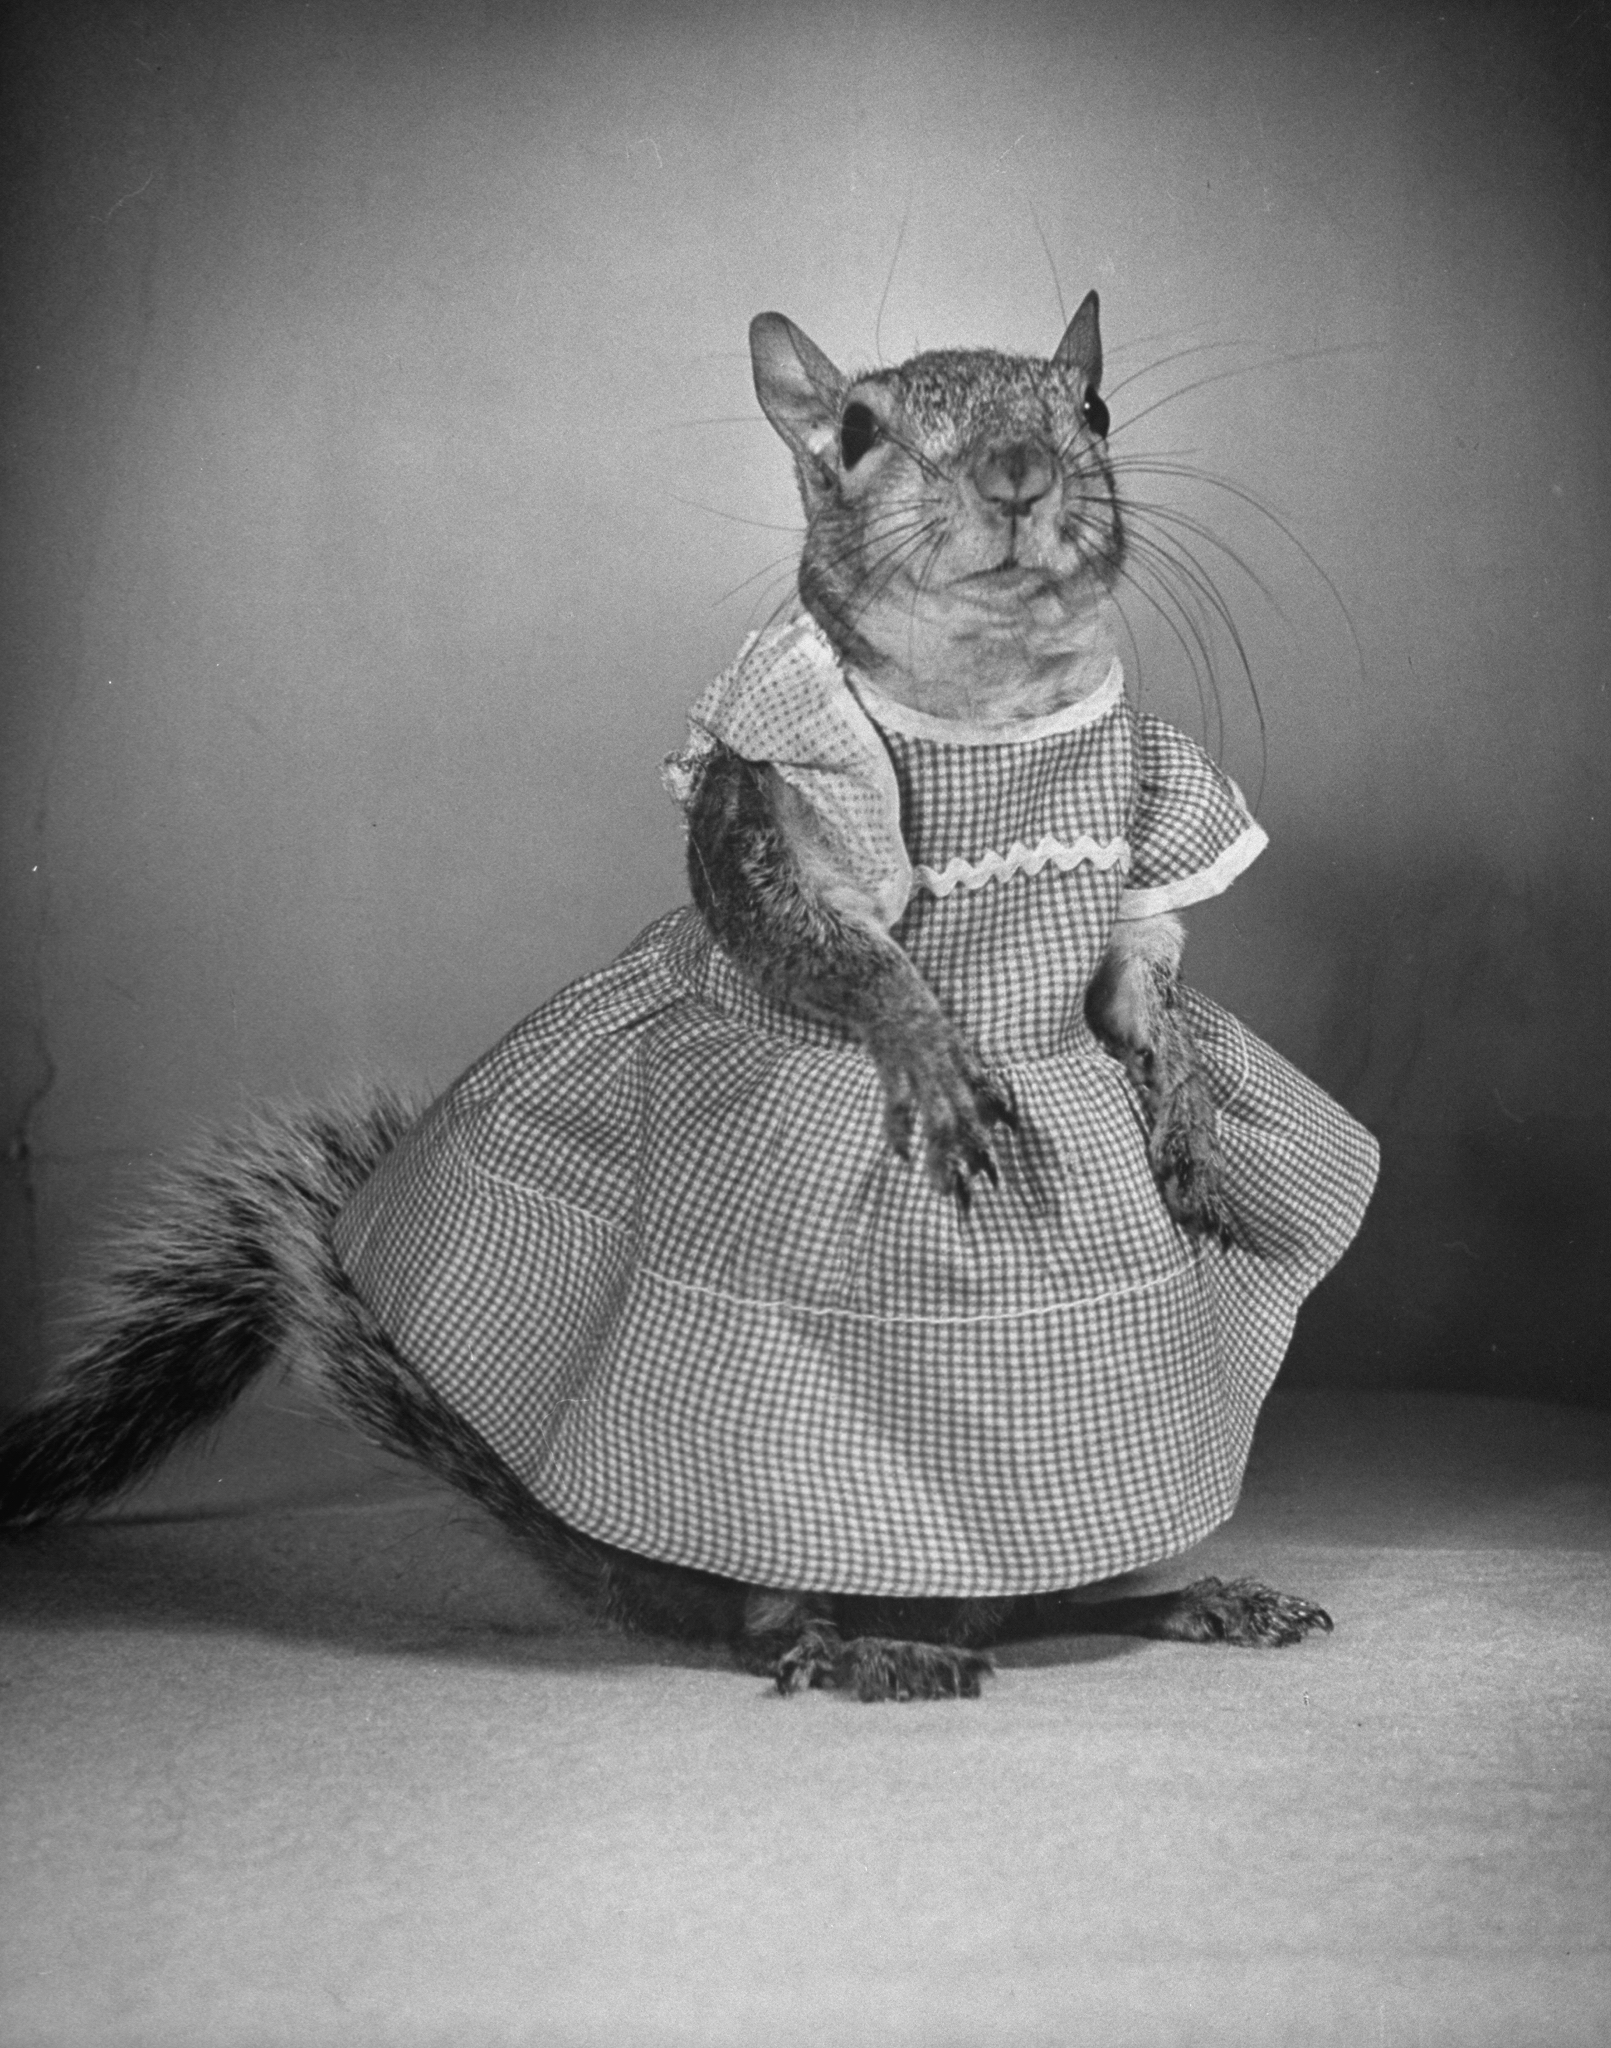 A Squirrel's Guide to Fashion